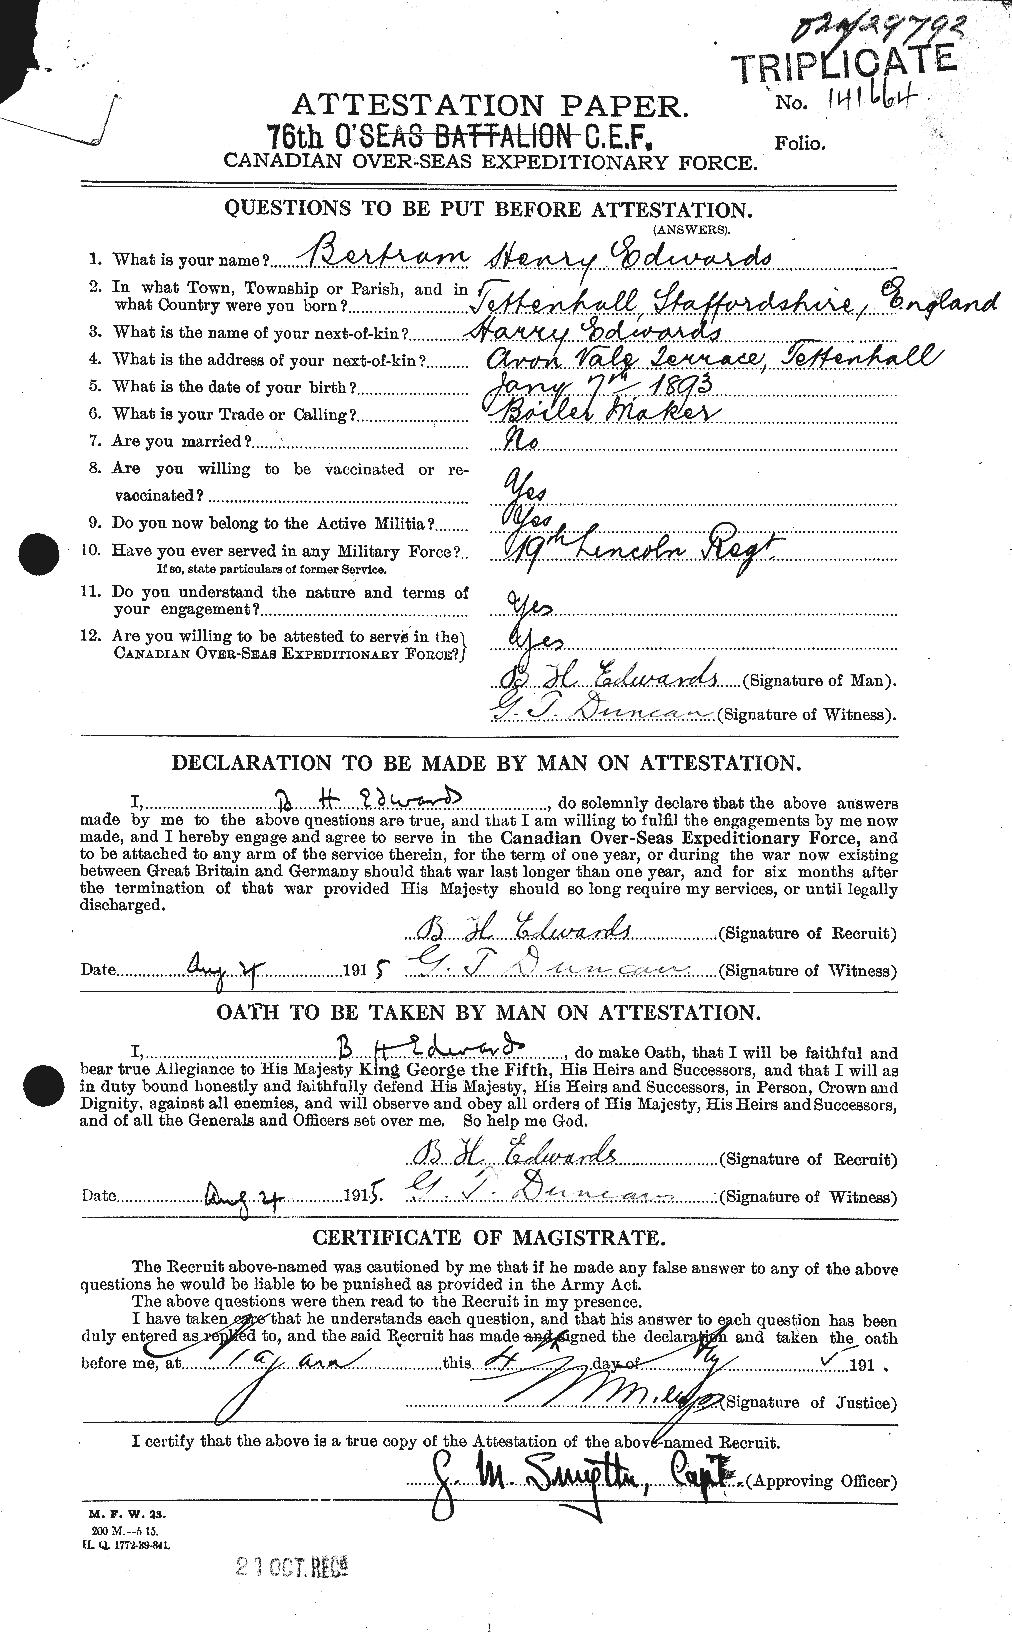 Personnel Records of the First World War - CEF 313150a